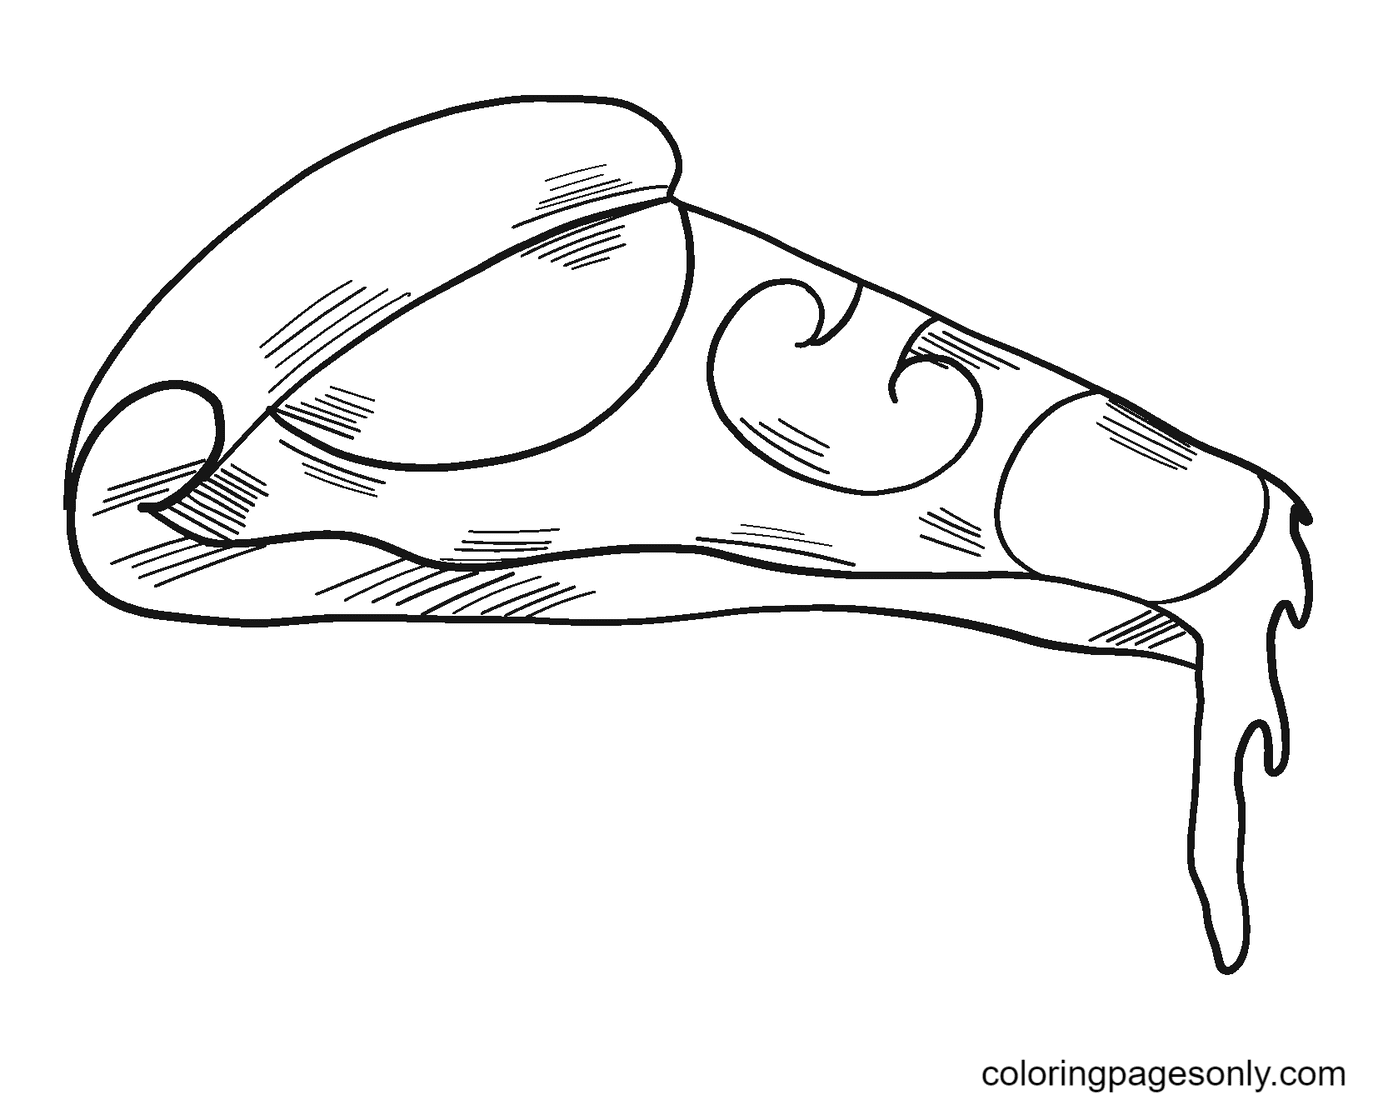 Slice of Pizza Coloring Pages